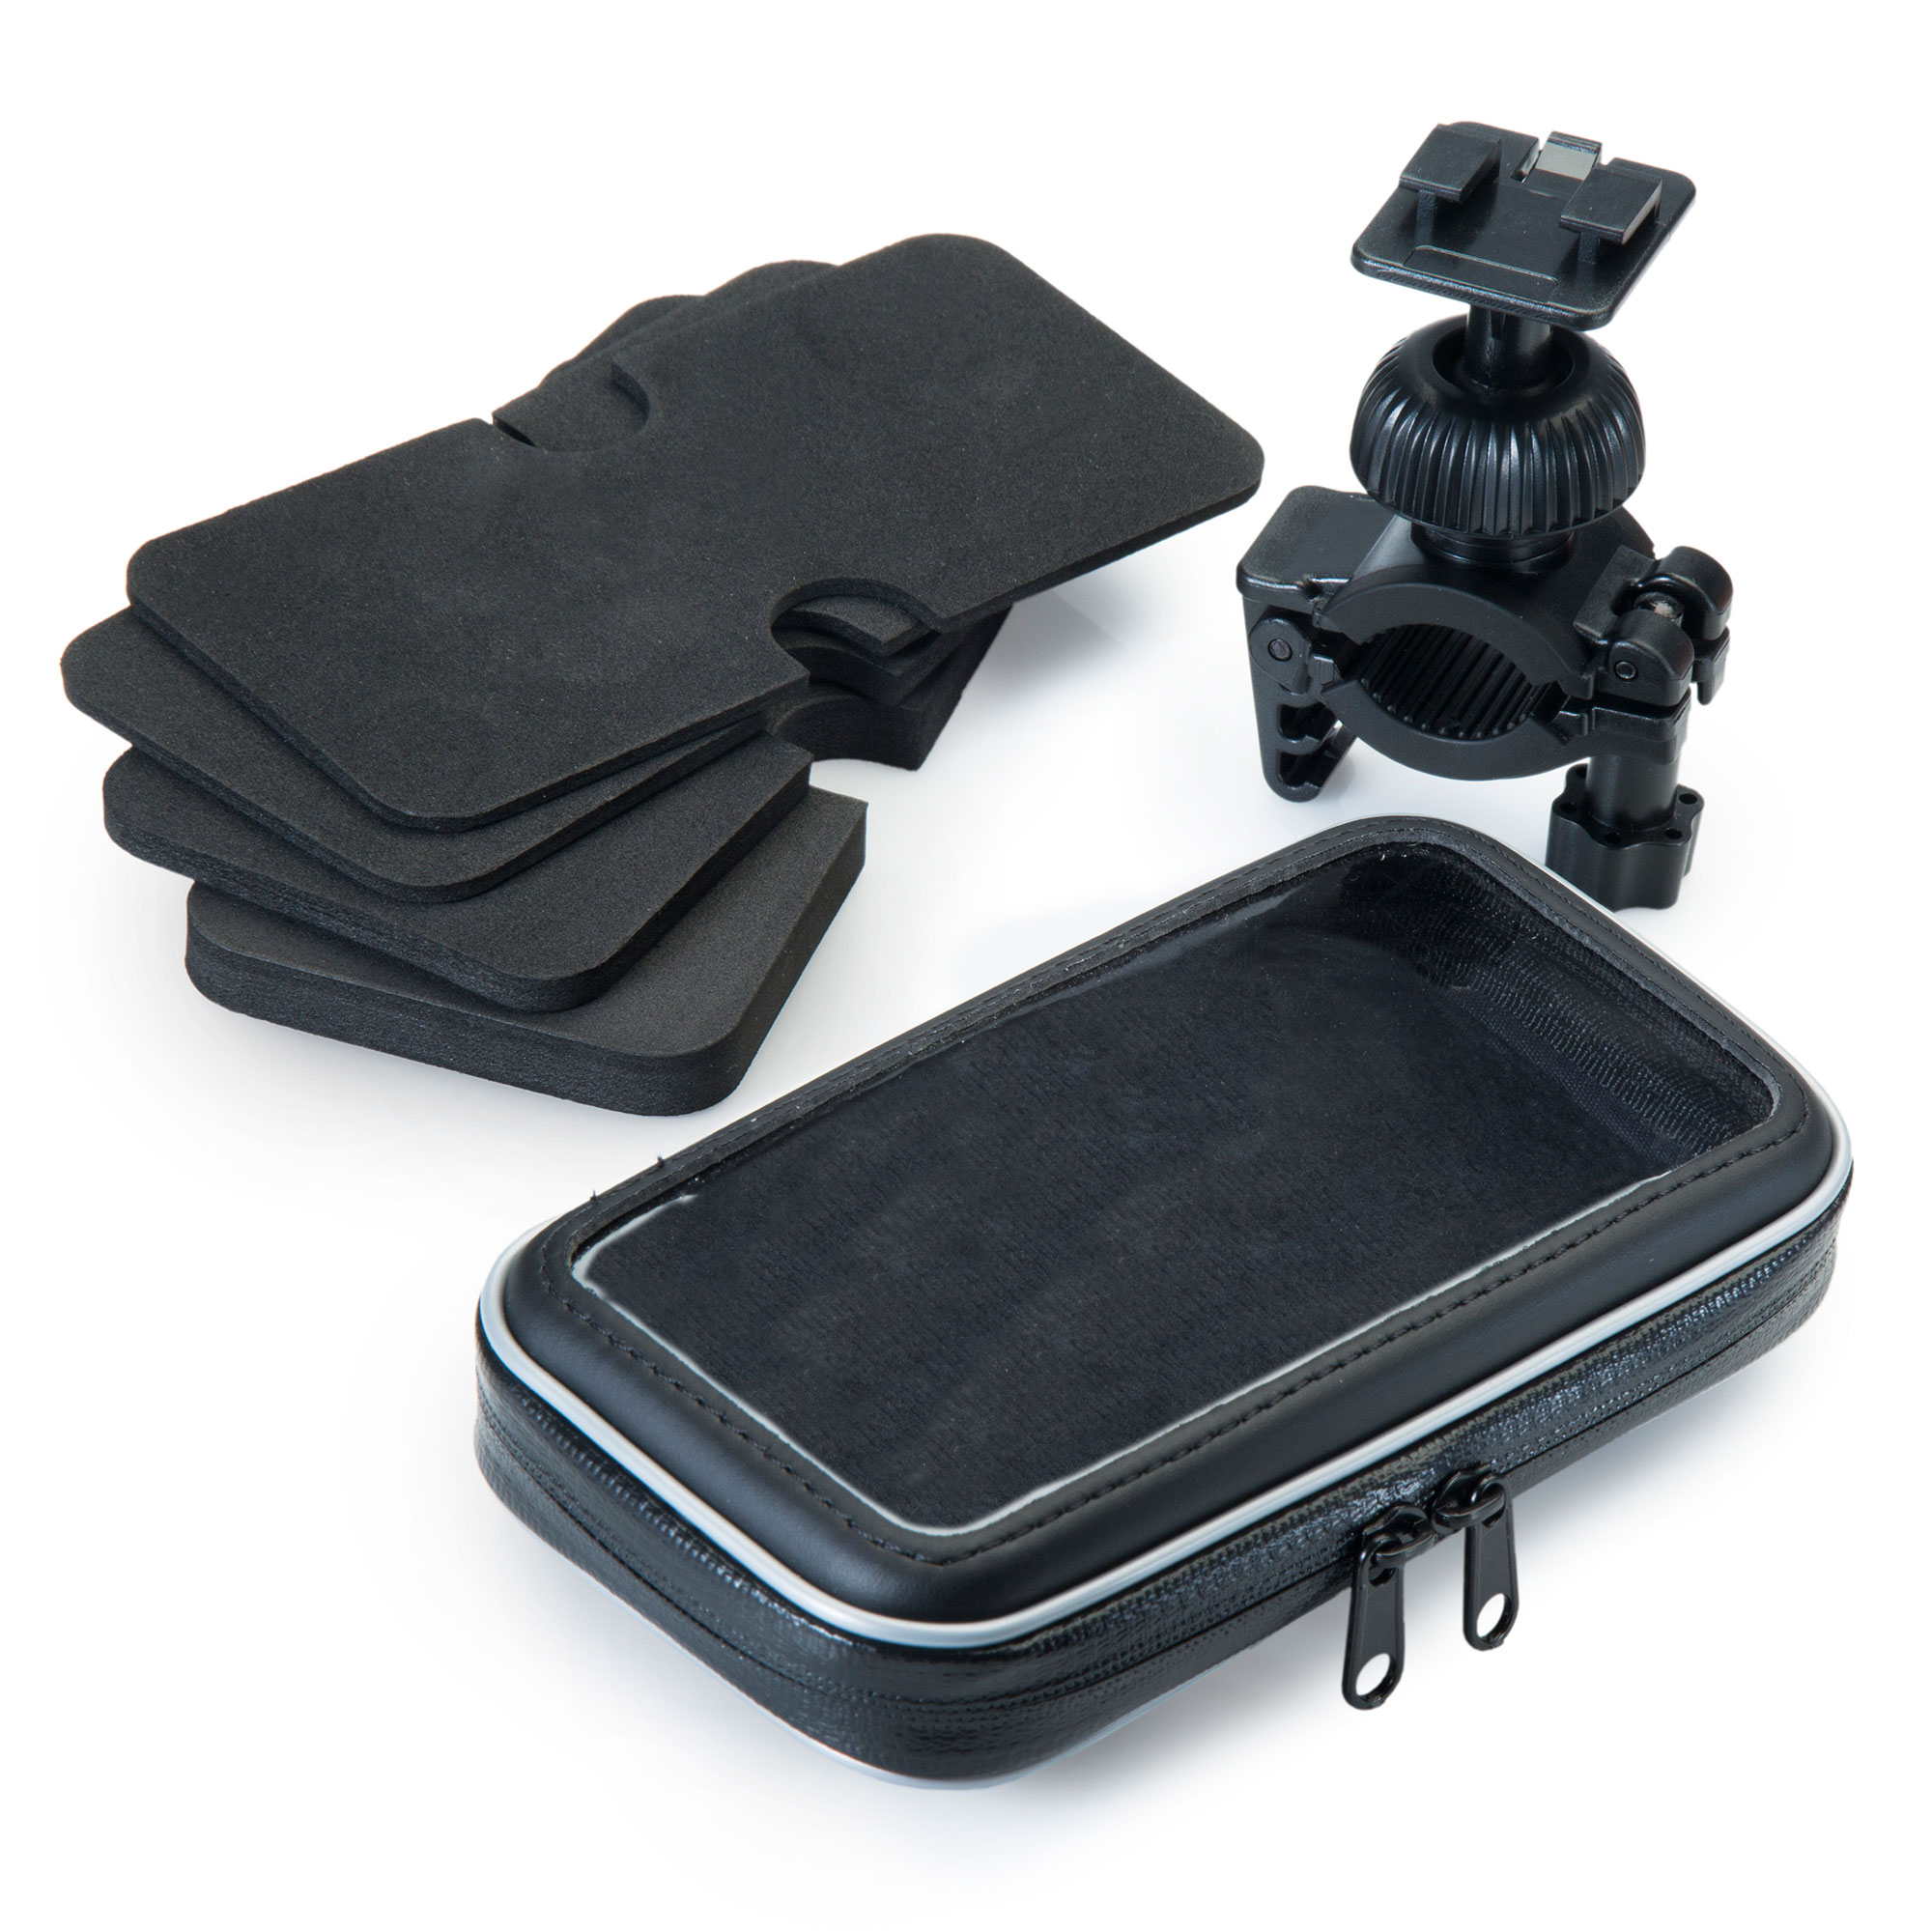 Heavy Duty Weather Resistant Bicycle / Motorcycle Handlebar Mount Holder Designed for the Sony Ericsson Xperia Play